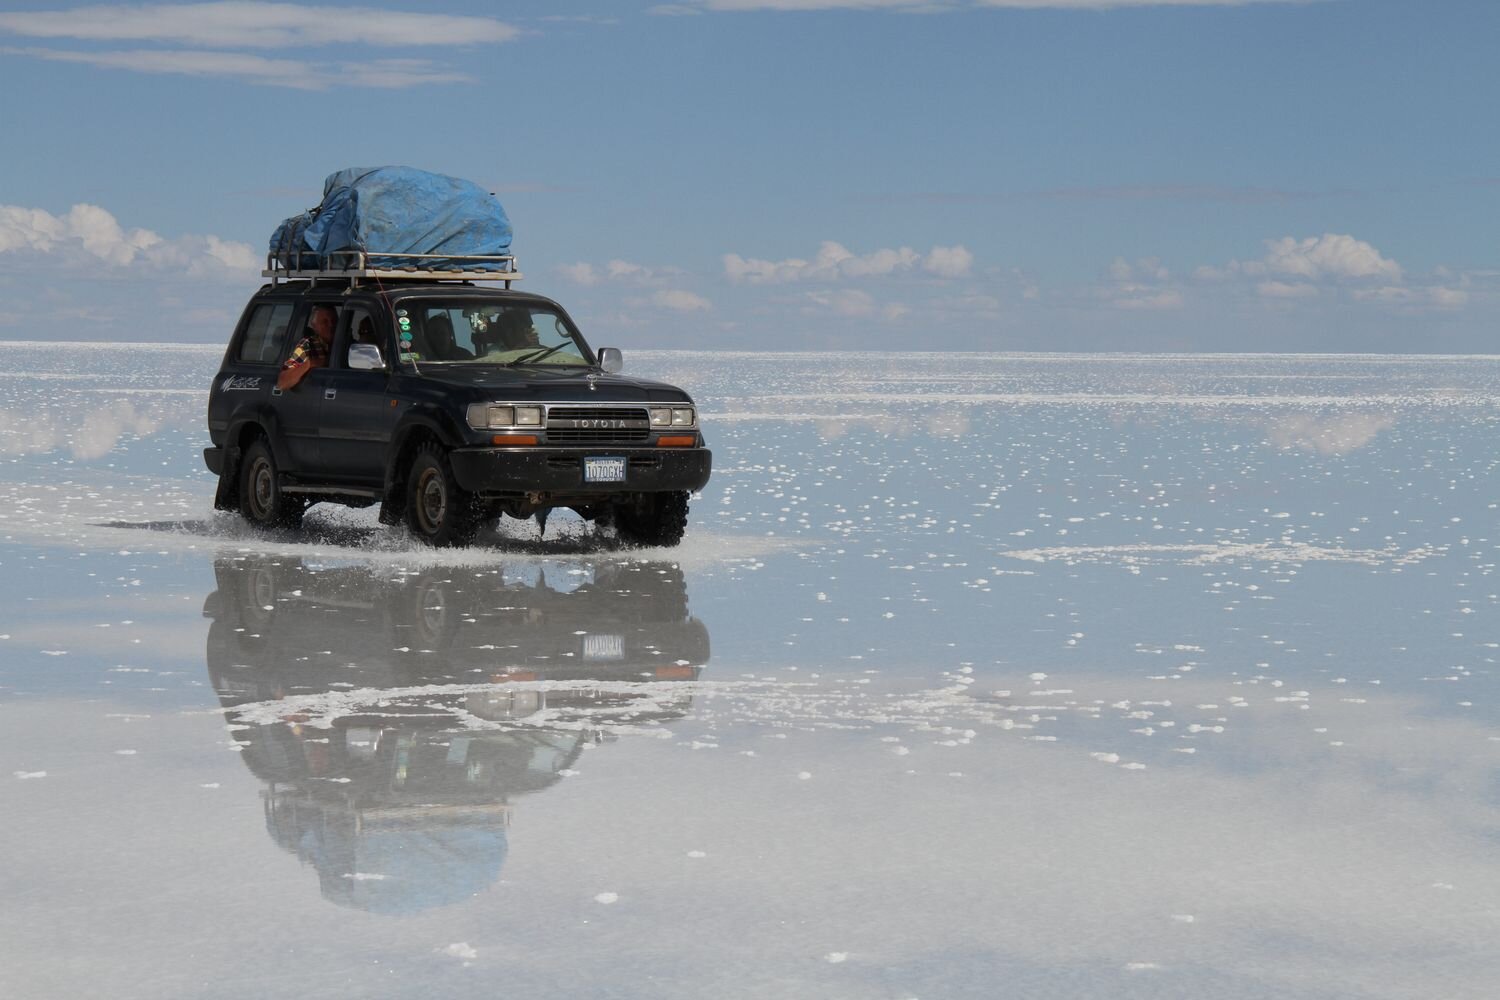  From the end of December and in January and February, it is the rain season in this part of the Andes. We may find the salt flat totally flooded but still possible to cross it on our 4X4 vehicles 